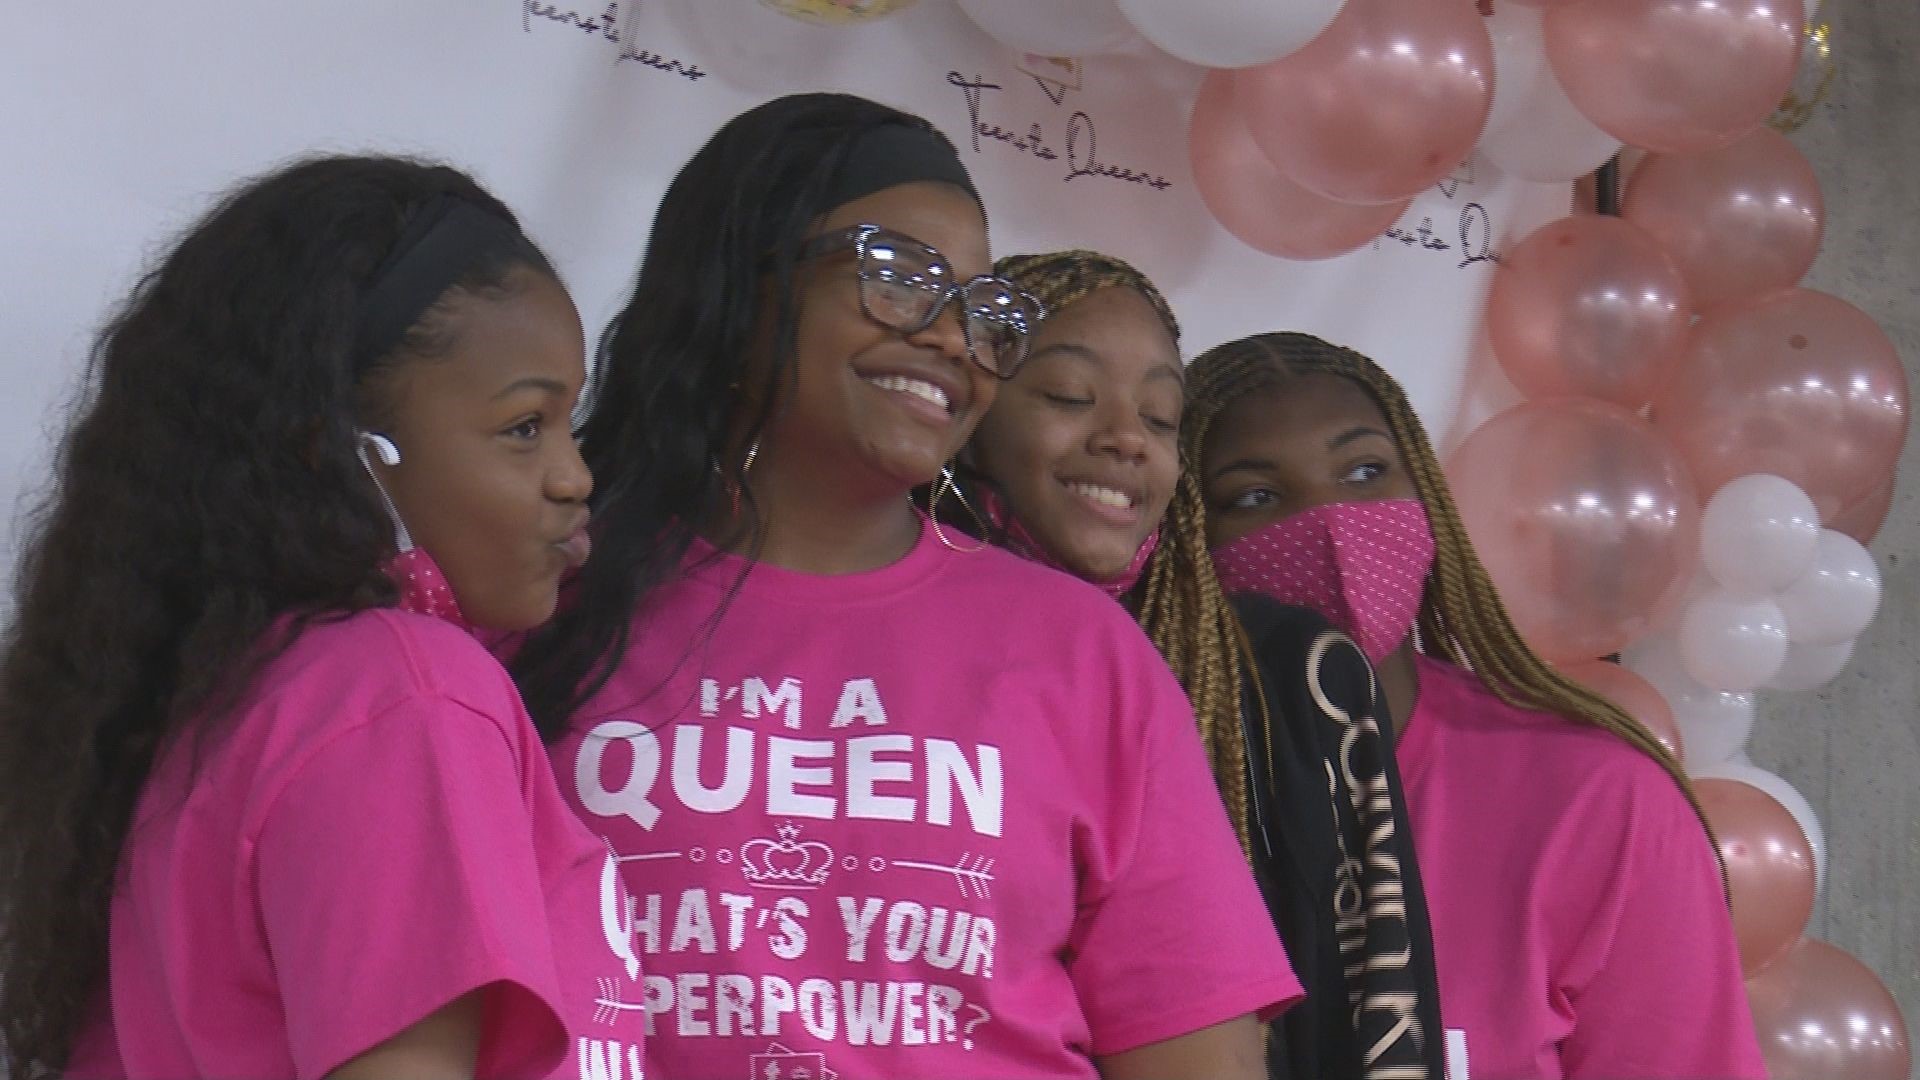 Young "queens" from across central Georgia spent the weekend at Booker T Washington Community Center, at a workshop aimed to build skills and self-confidence